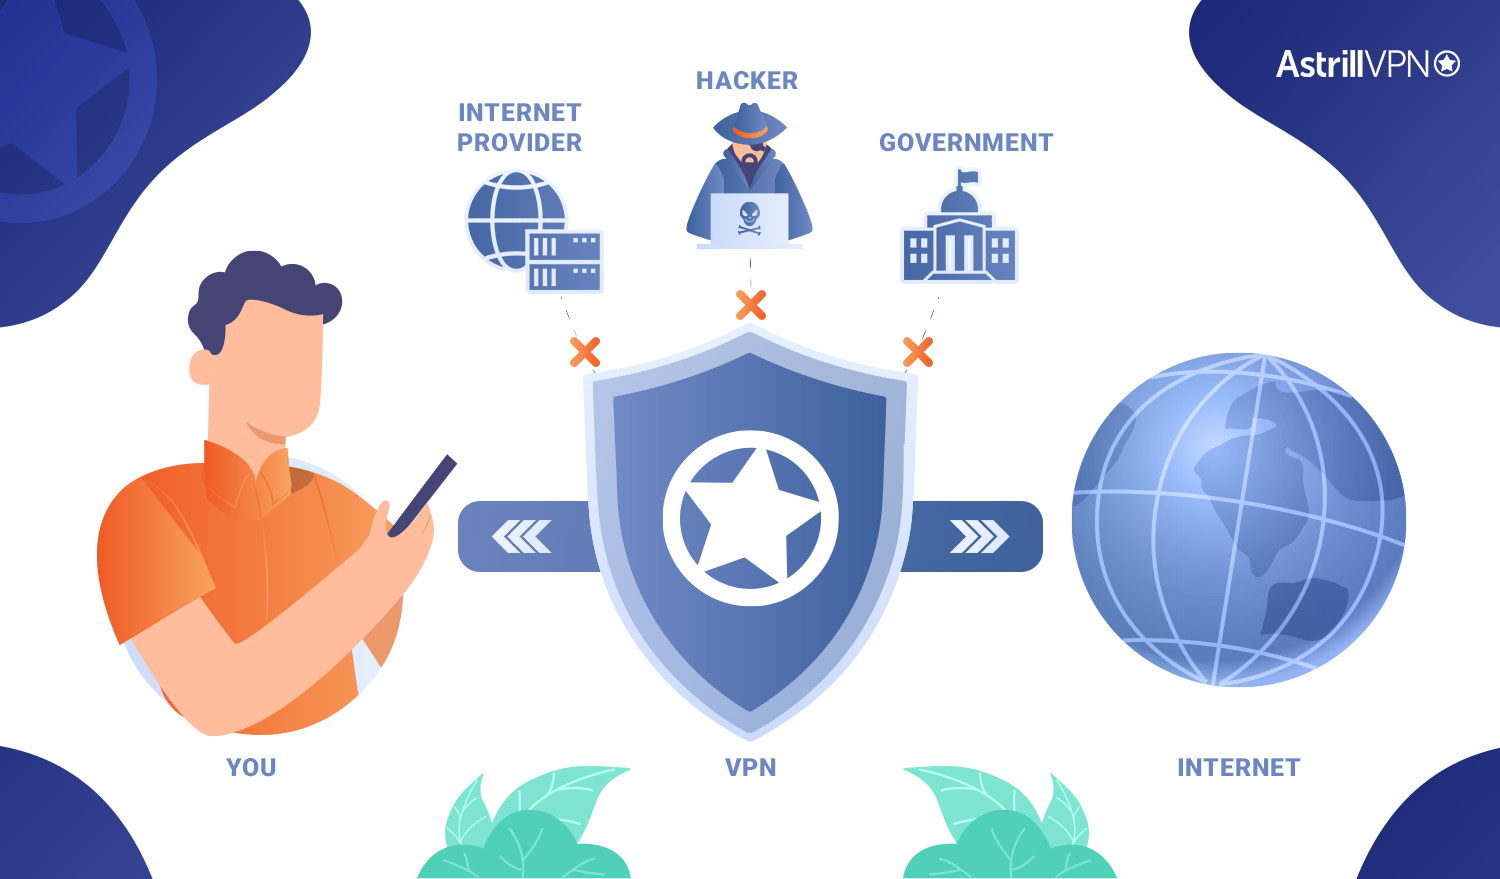 PPTP VPN protocol - What is it and How to use it?